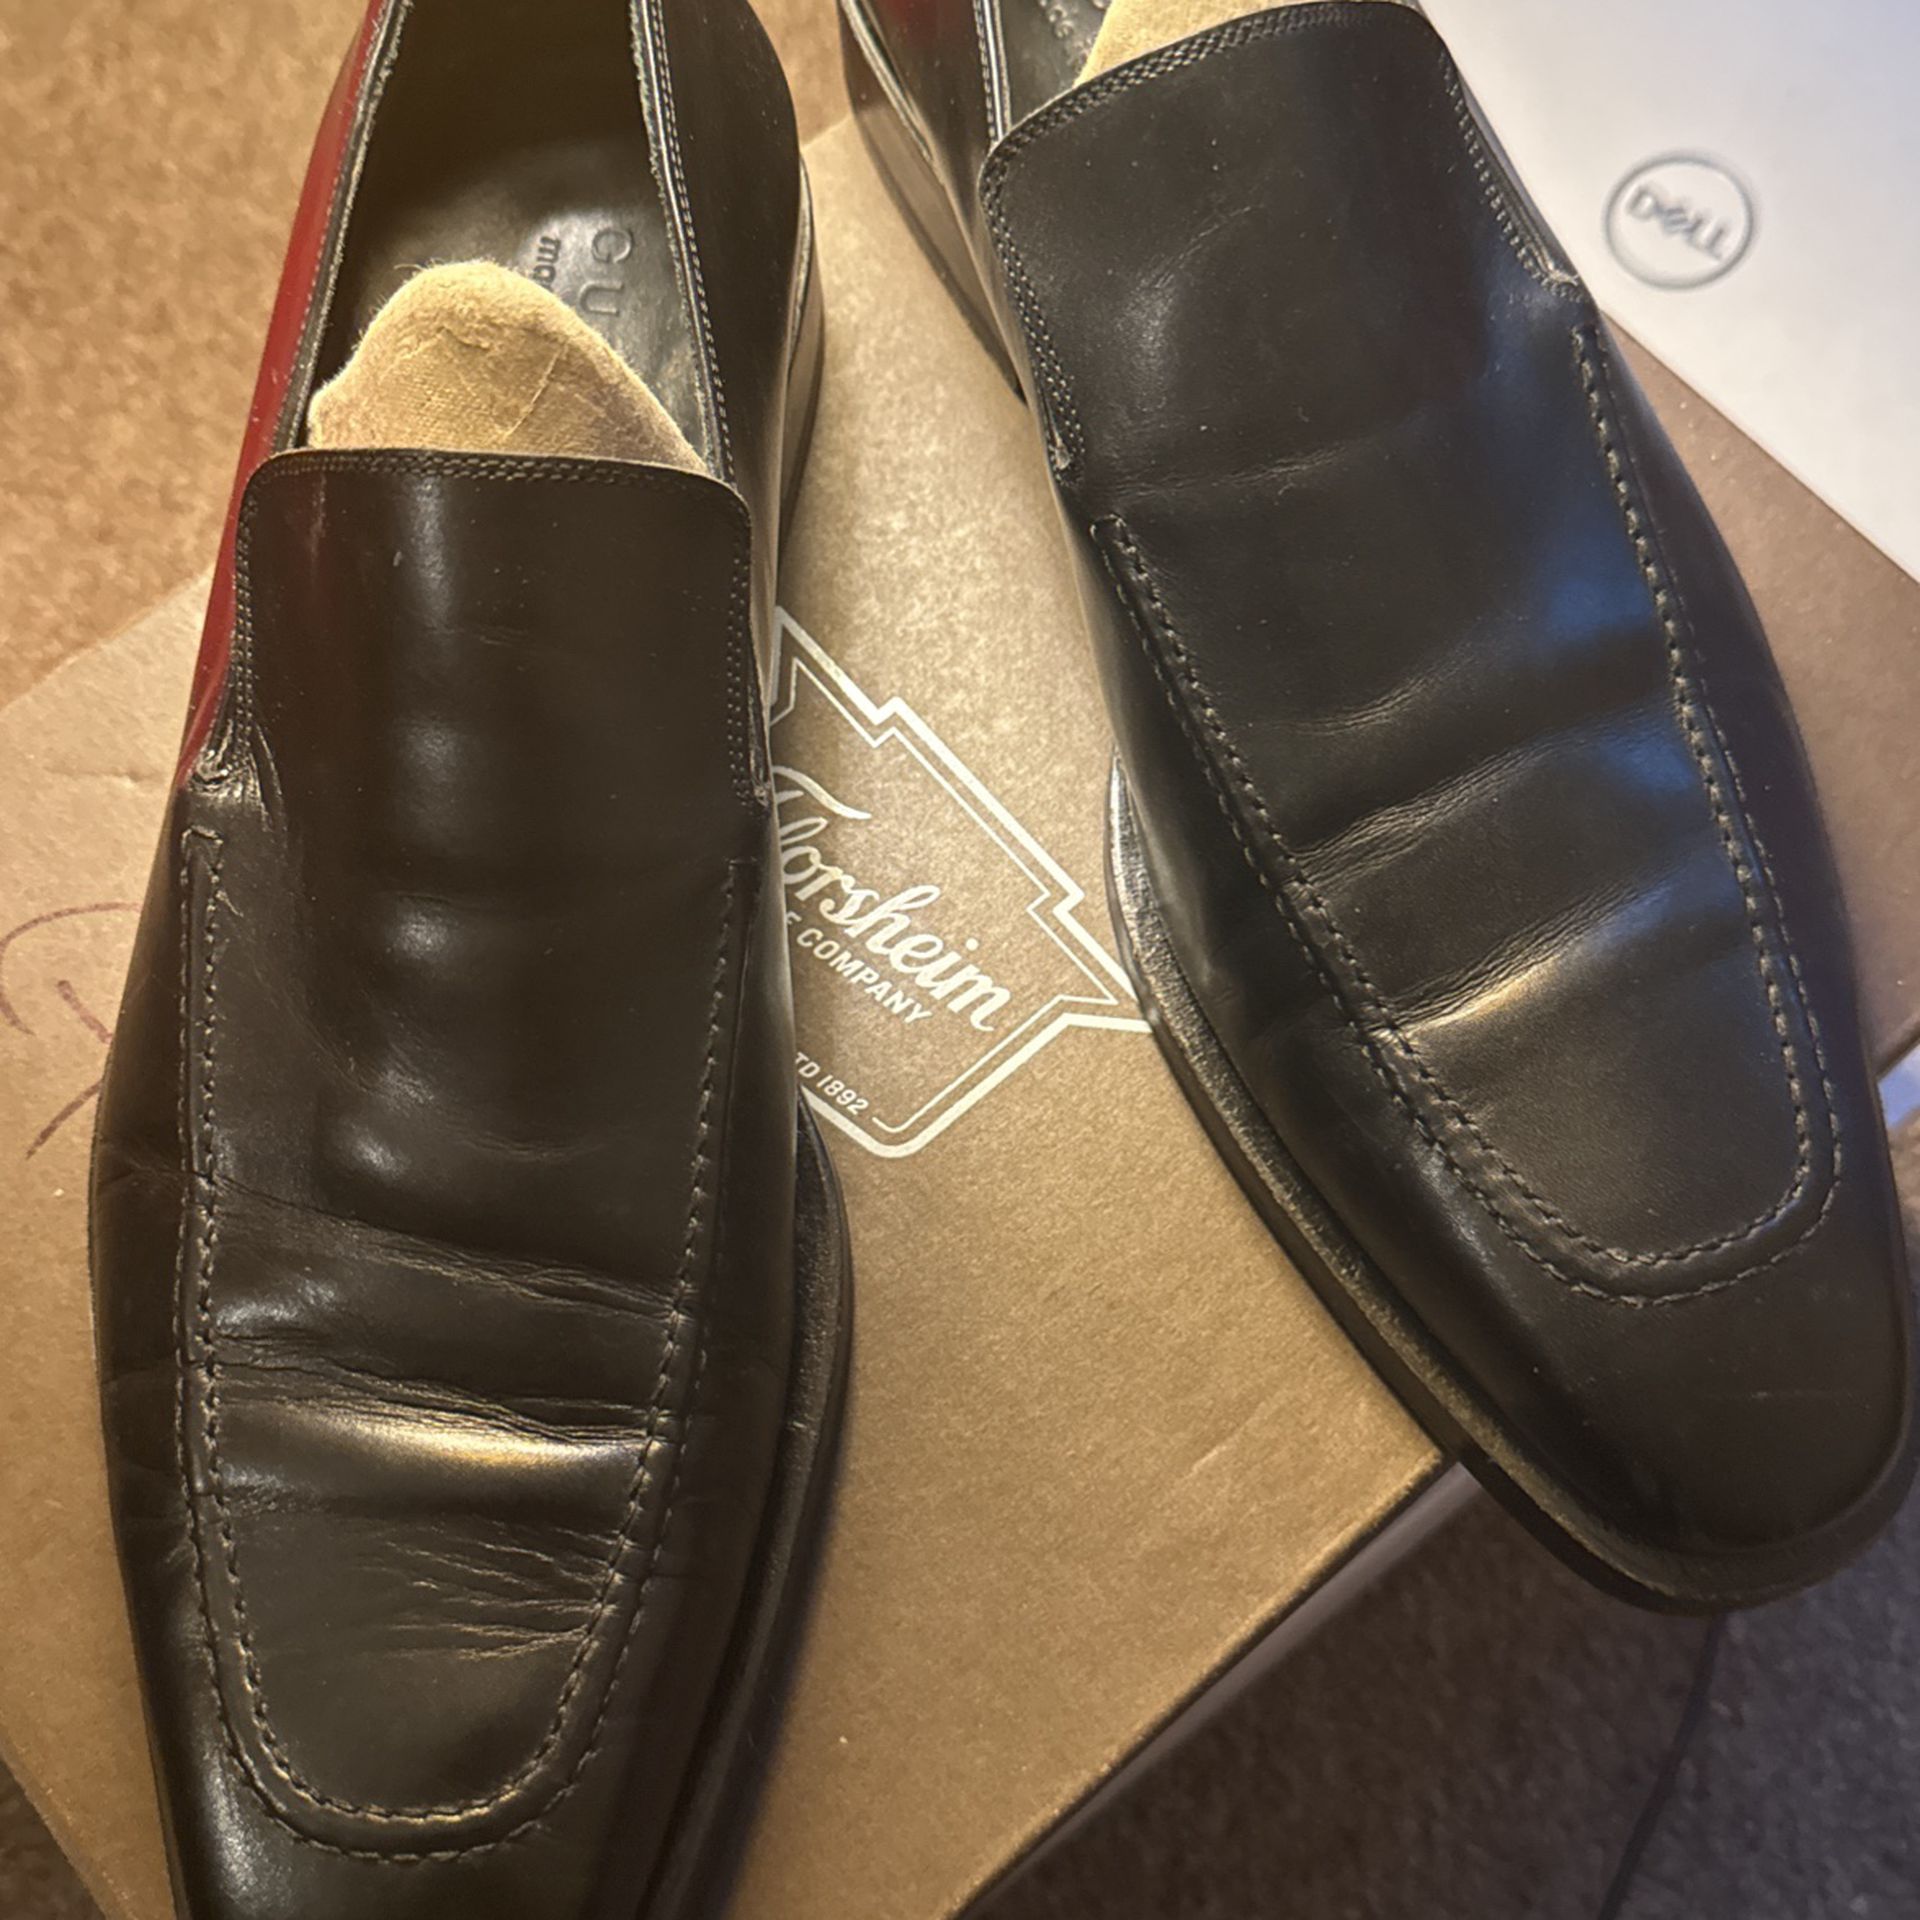 Gucci Loafers 10.5 US,